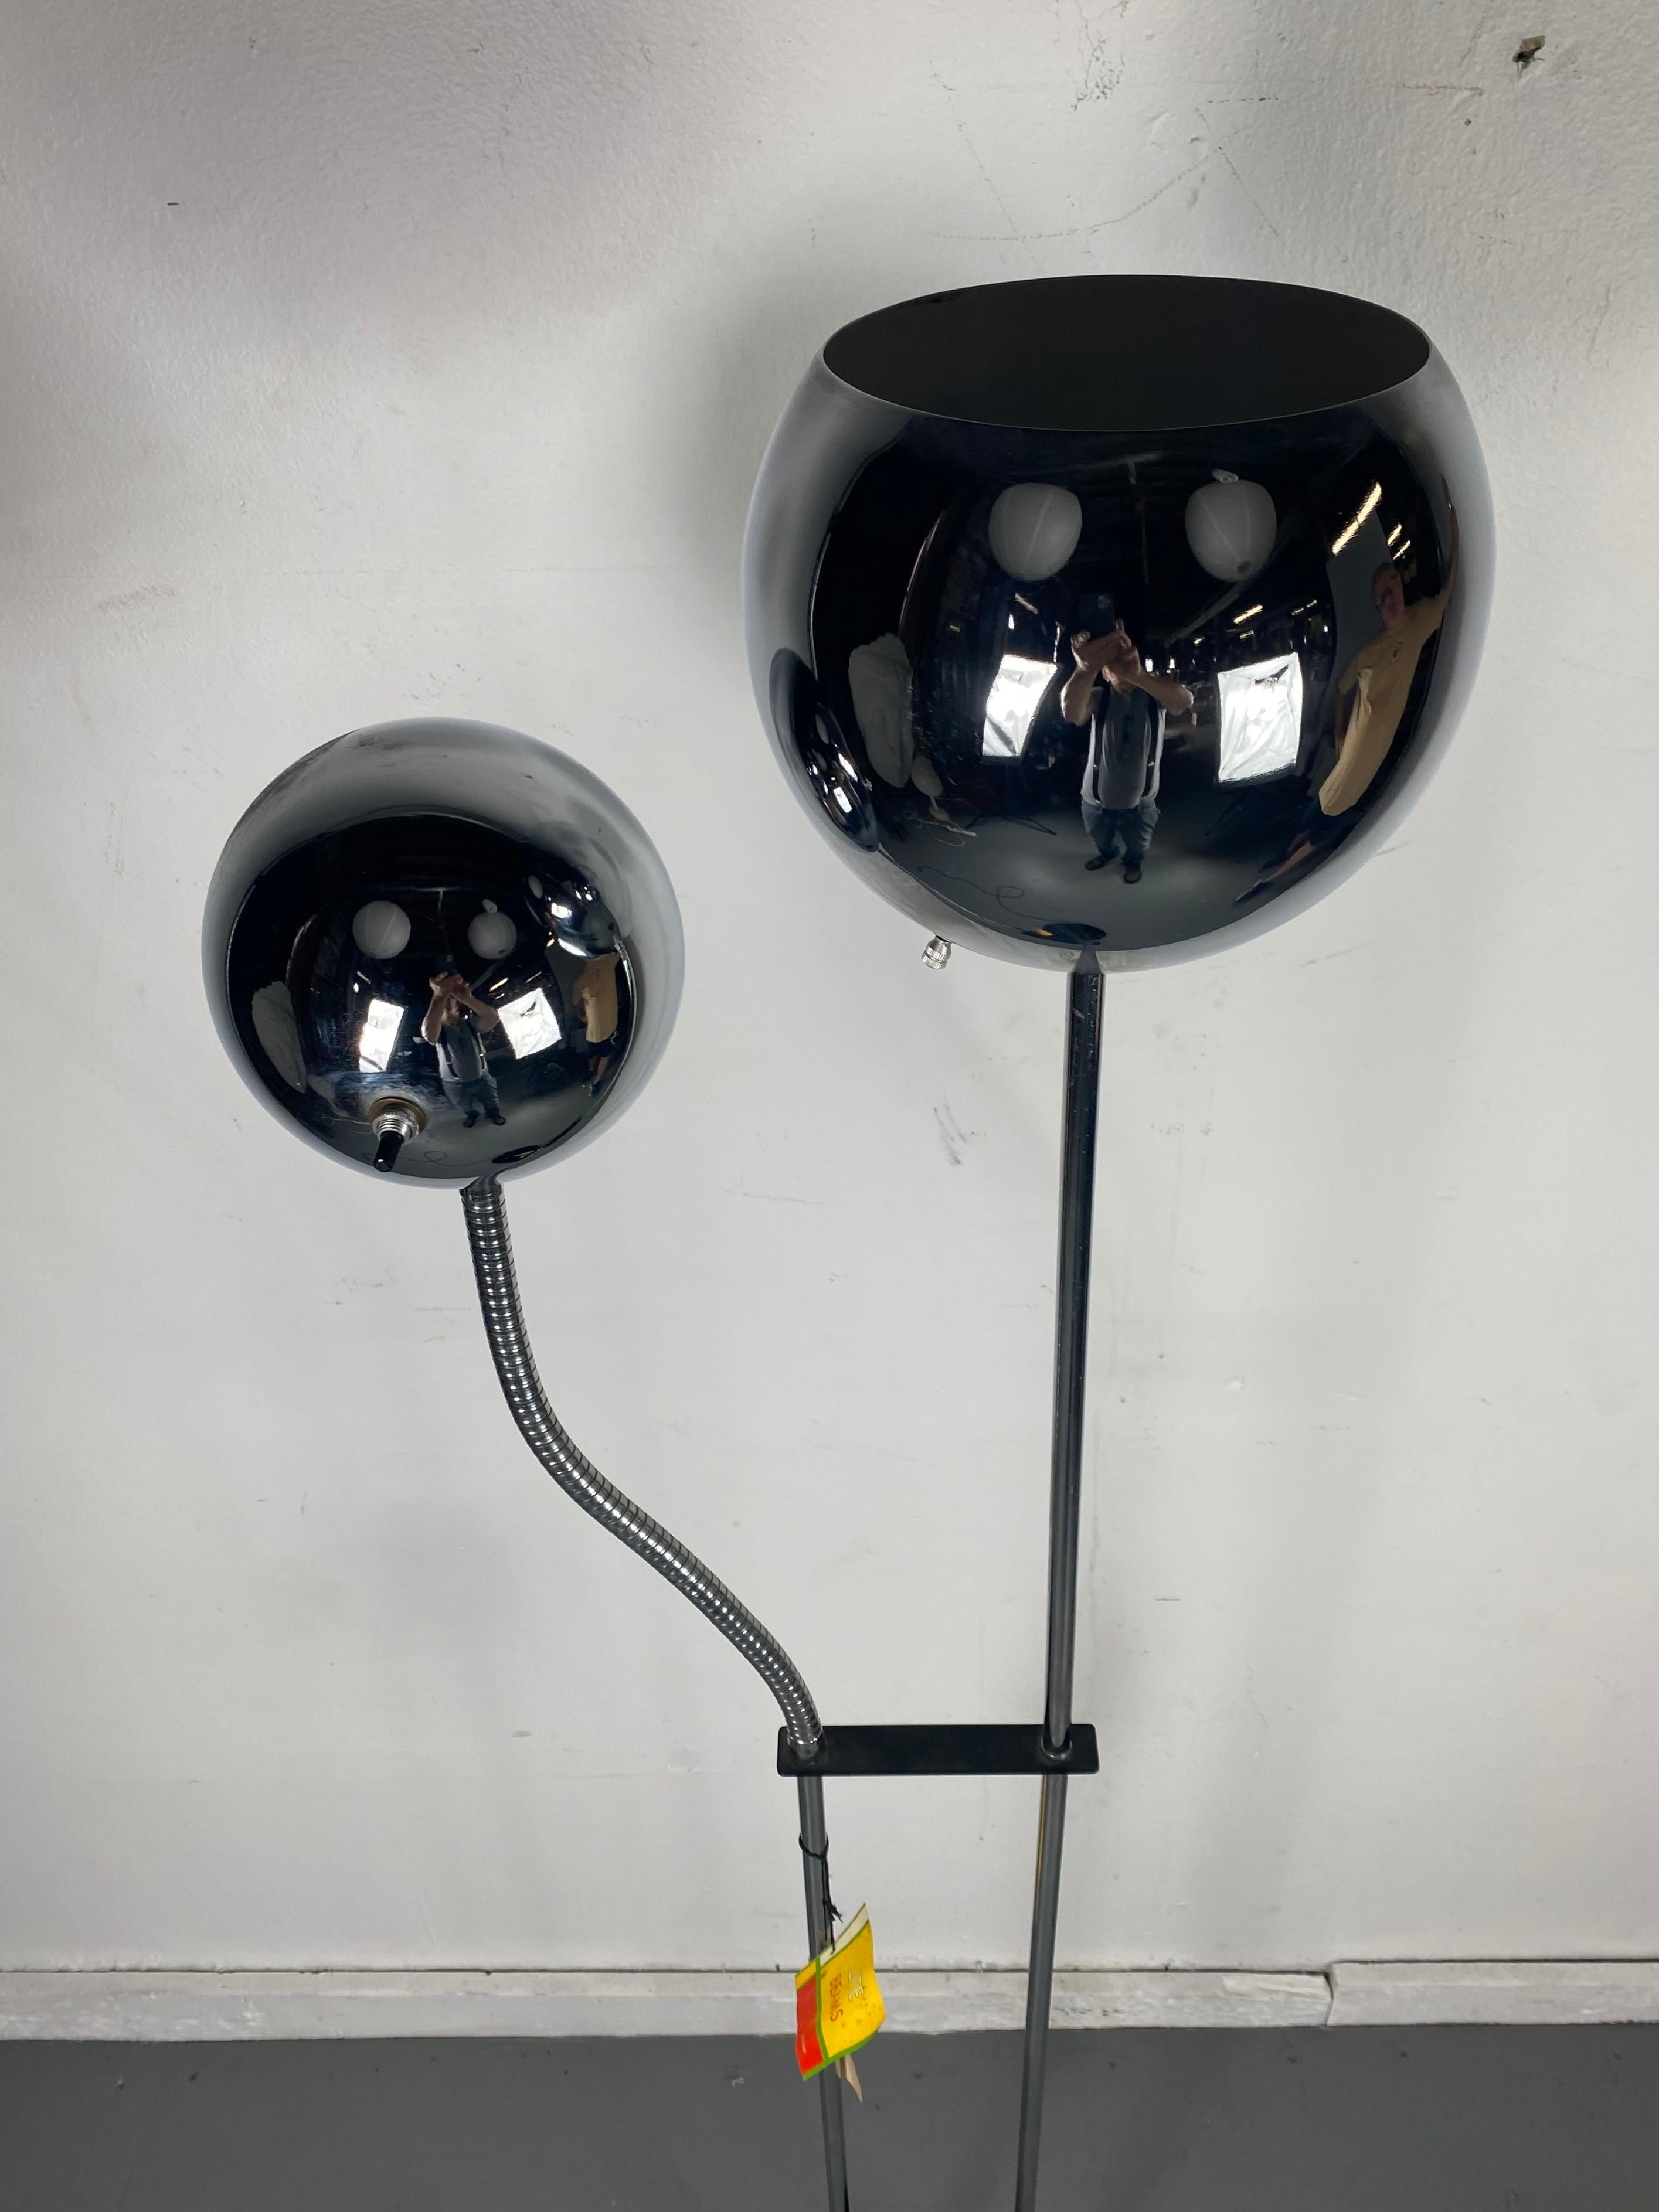 North American Classic 1970s Double Eye-Ball Chrome Floor Lamp by Lite Beams, After Sonneman For Sale